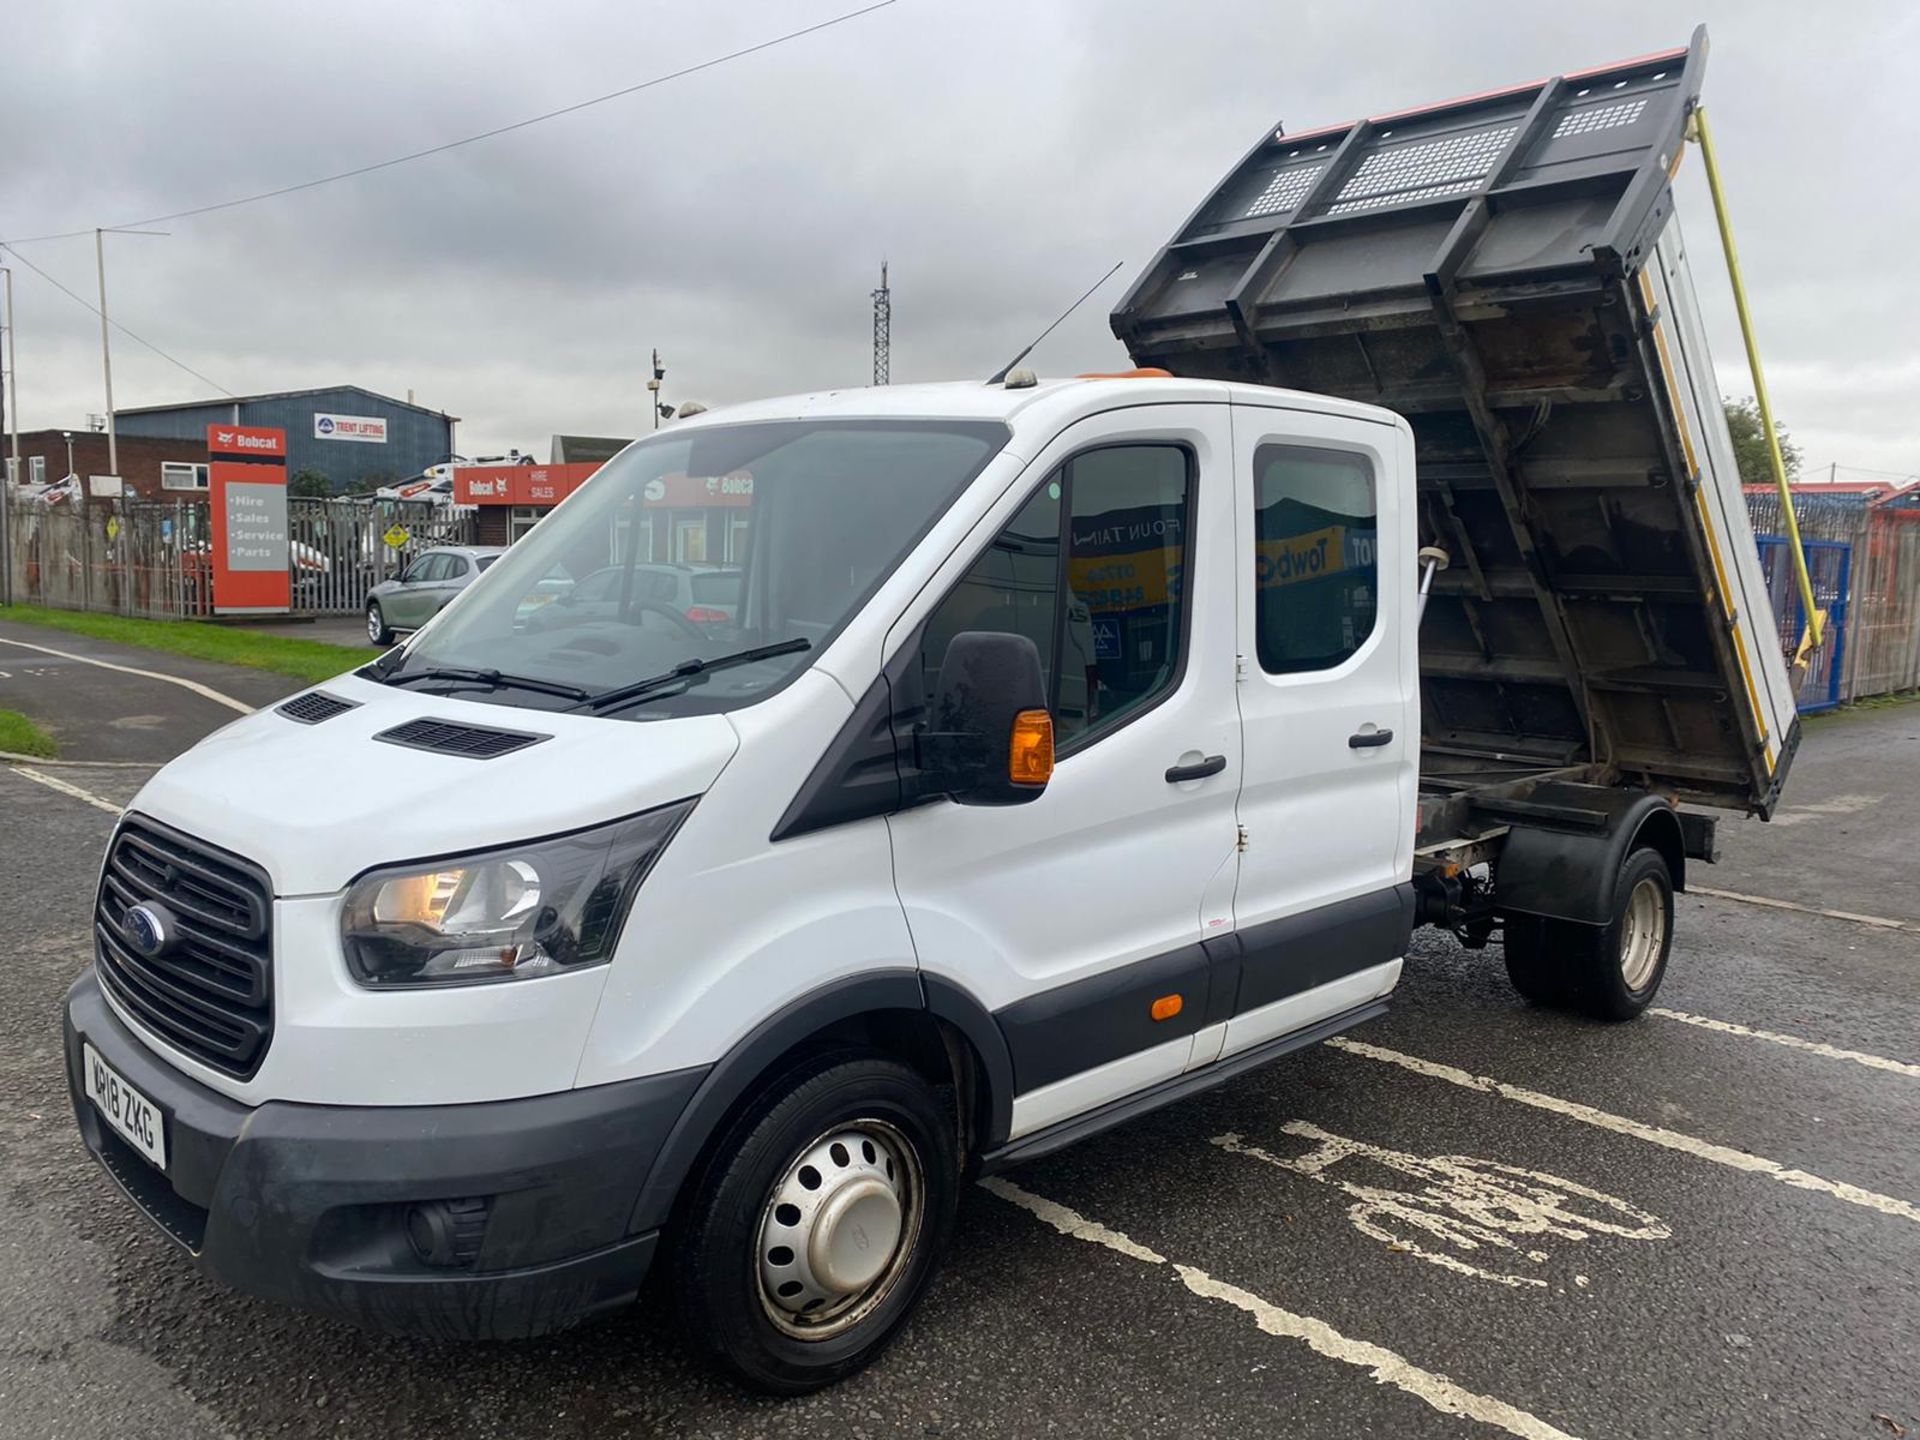 2018 18 FORD TRANSIT CREW CAB TIPPER - 96K MILES - EURO 6 - TWIN REAR WHEEL - Image 3 of 11